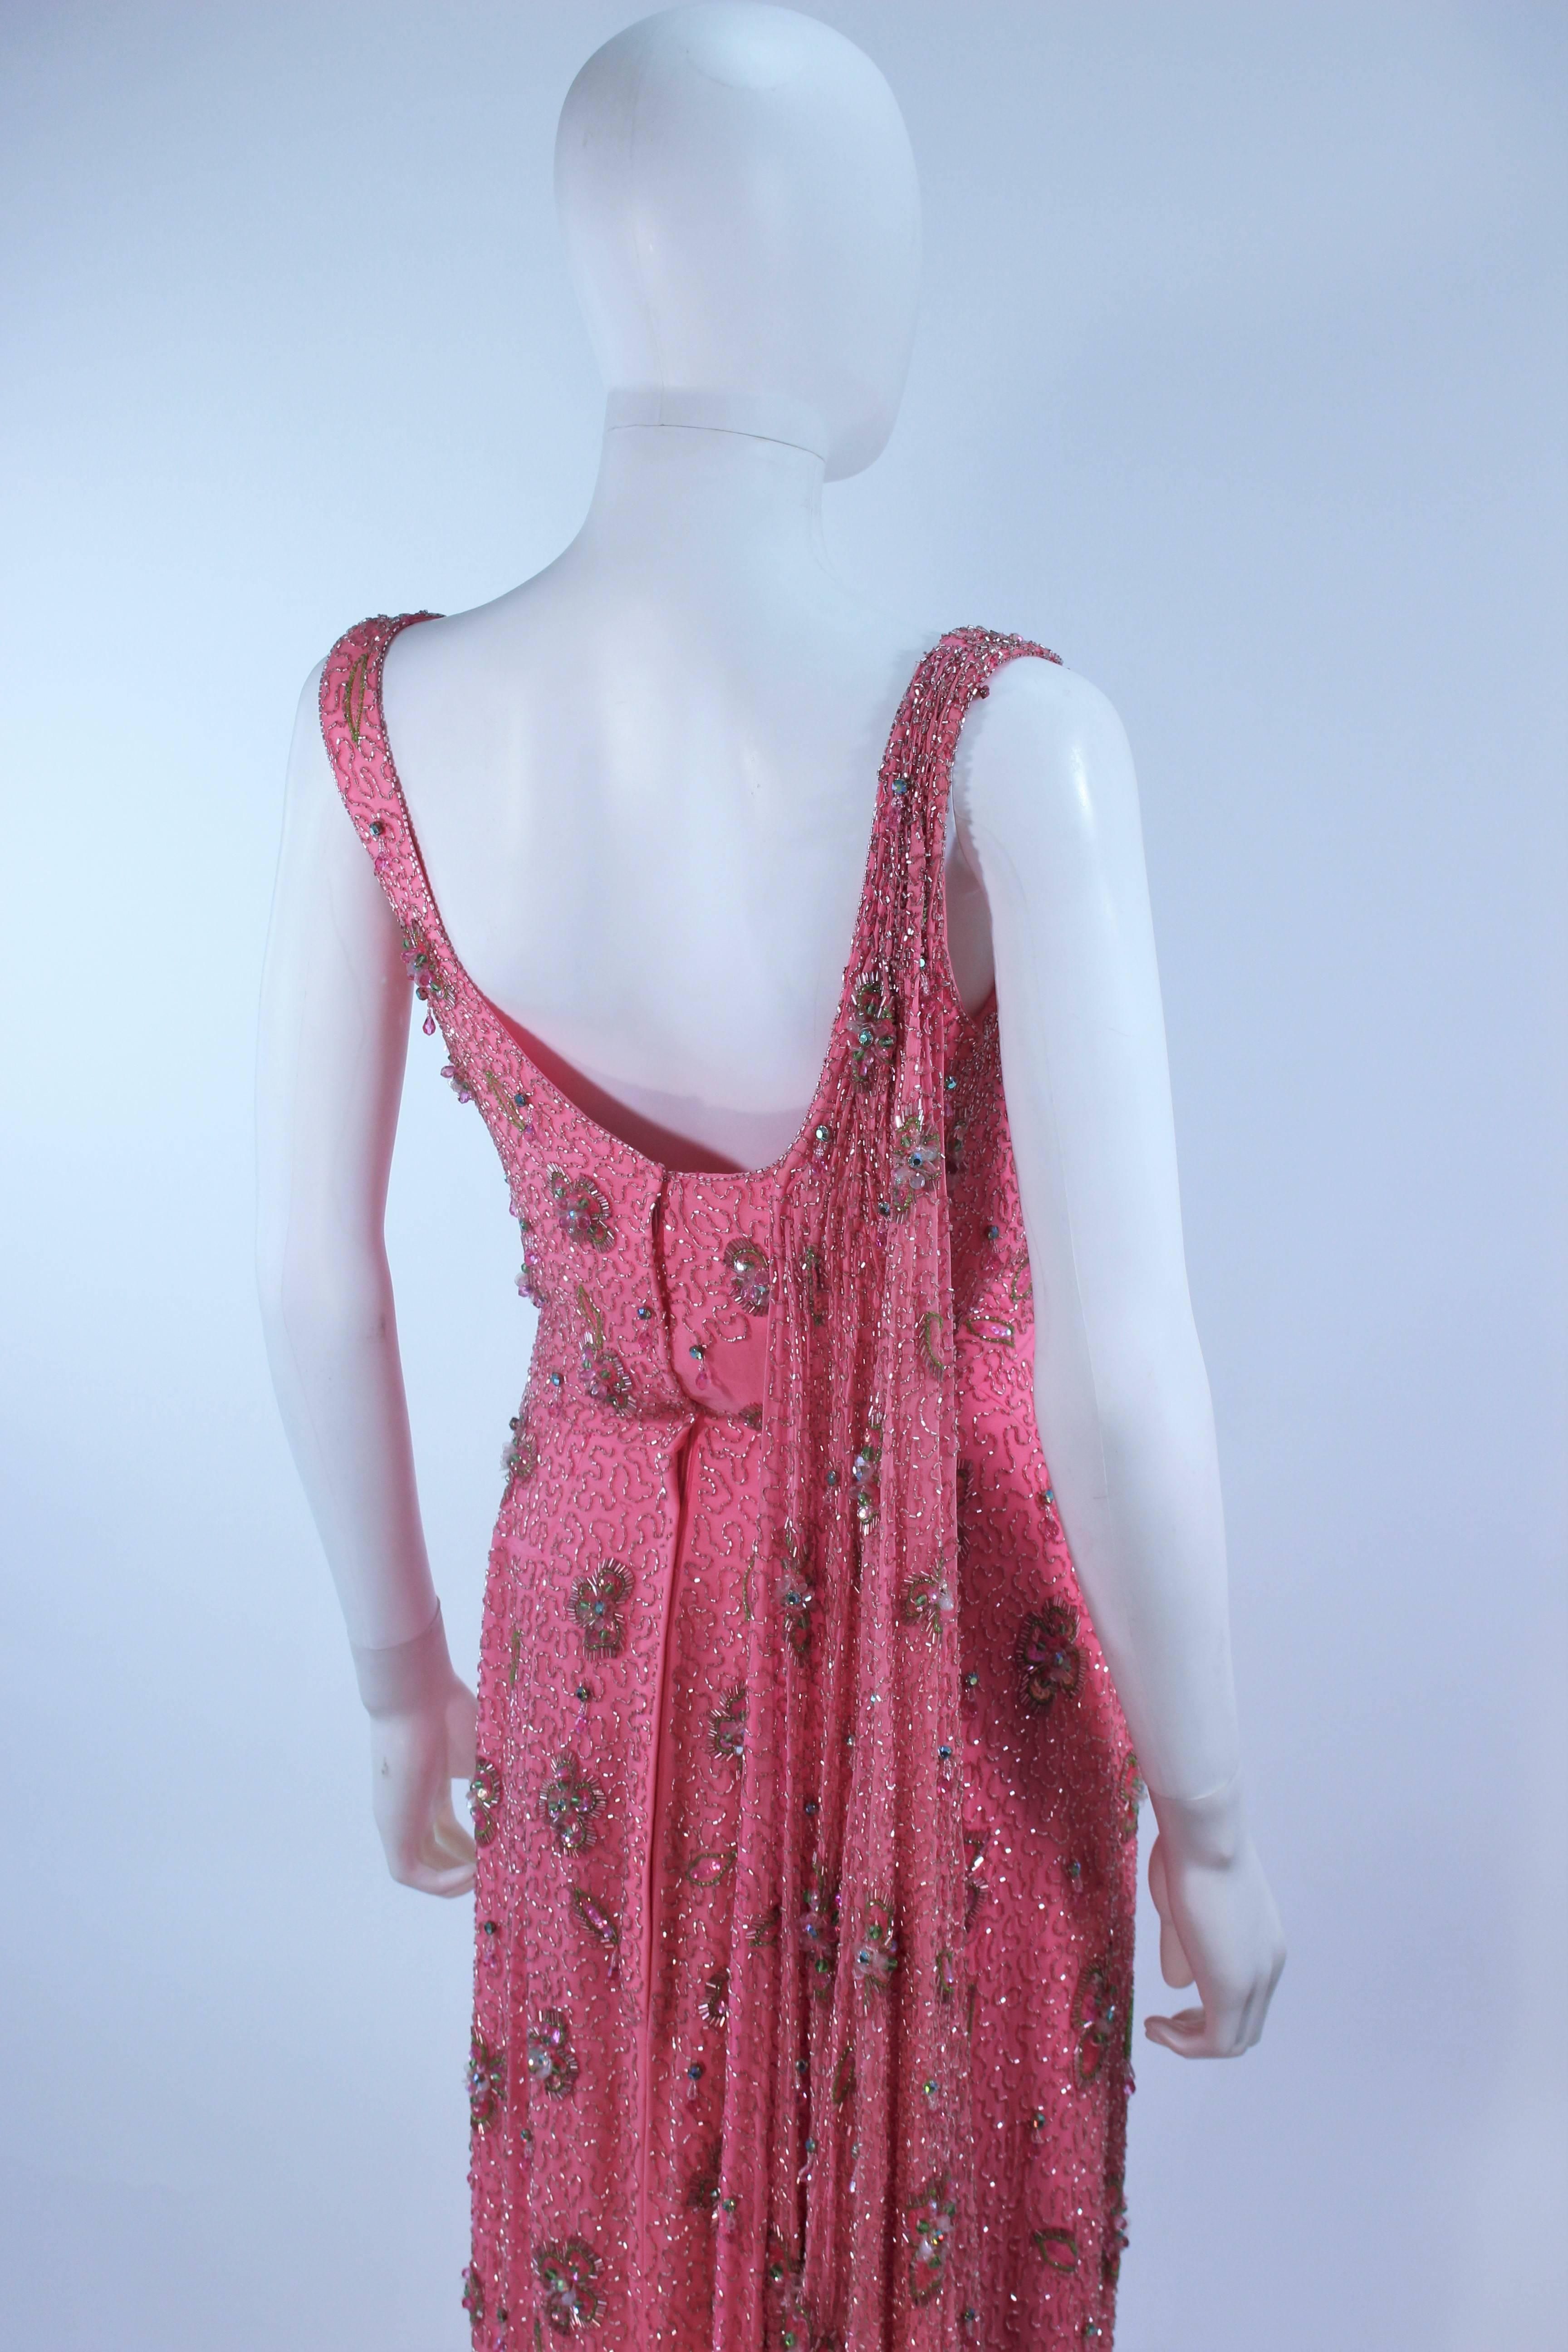 MAXWELL SHIEFF 1950's Pink Heavily Embellished Drape Gown Size 2 4  For Sale 4